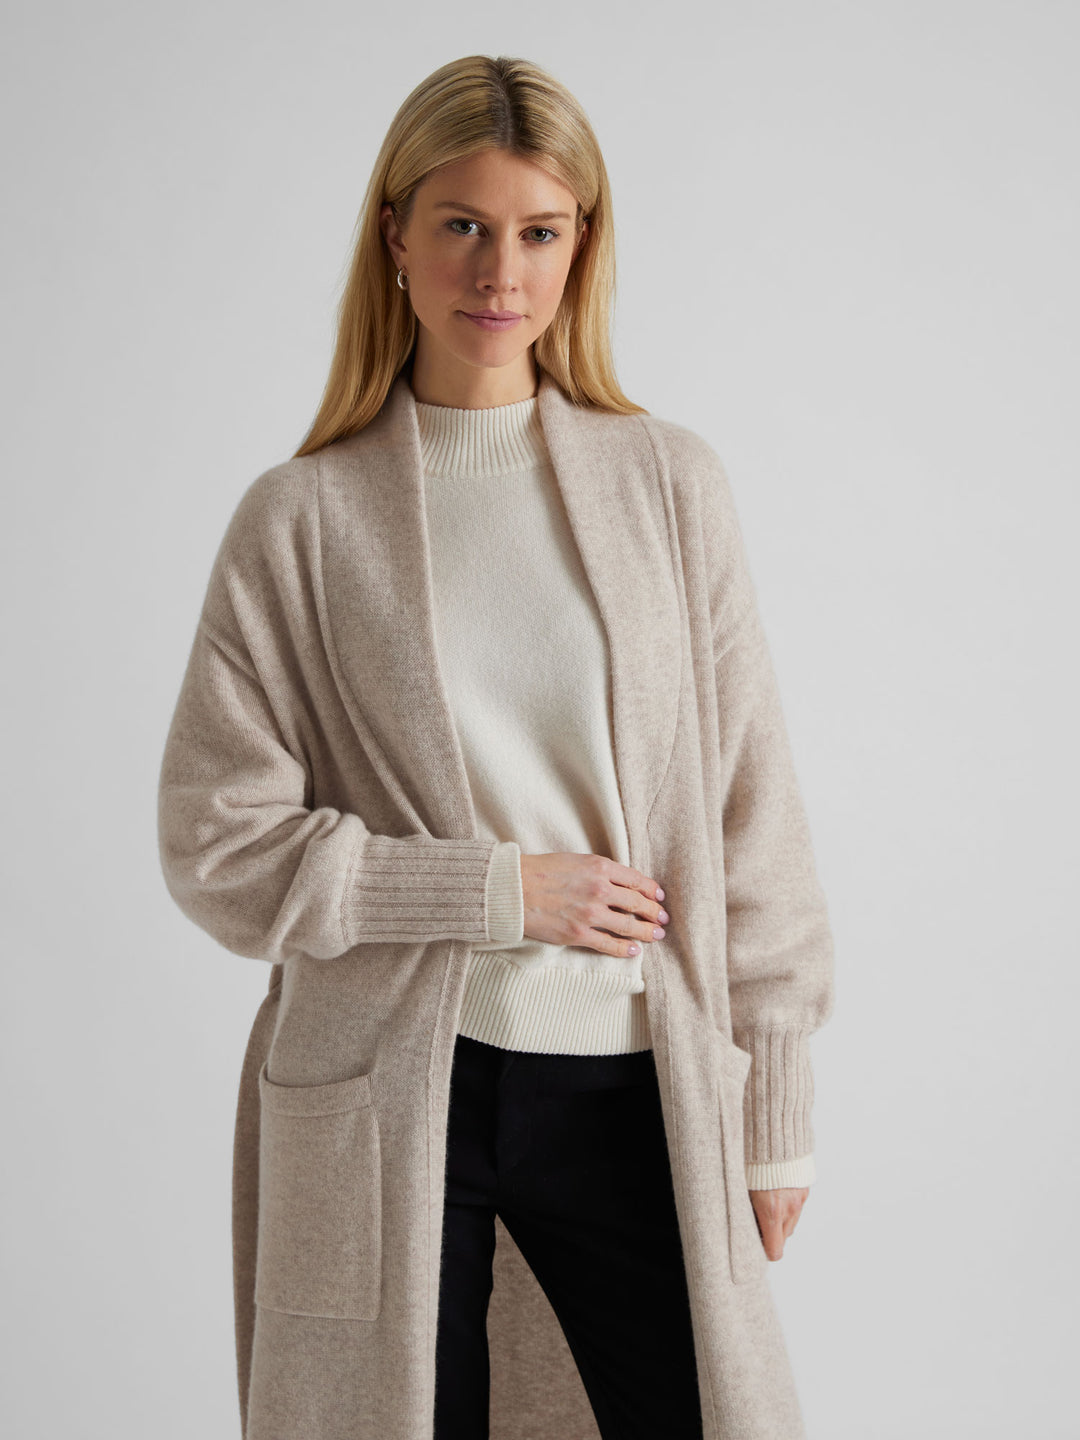 Cashmere coat "Trench" in 100% pure cashmere. Scandinavian dosing by Kashmina. Color: Beige.